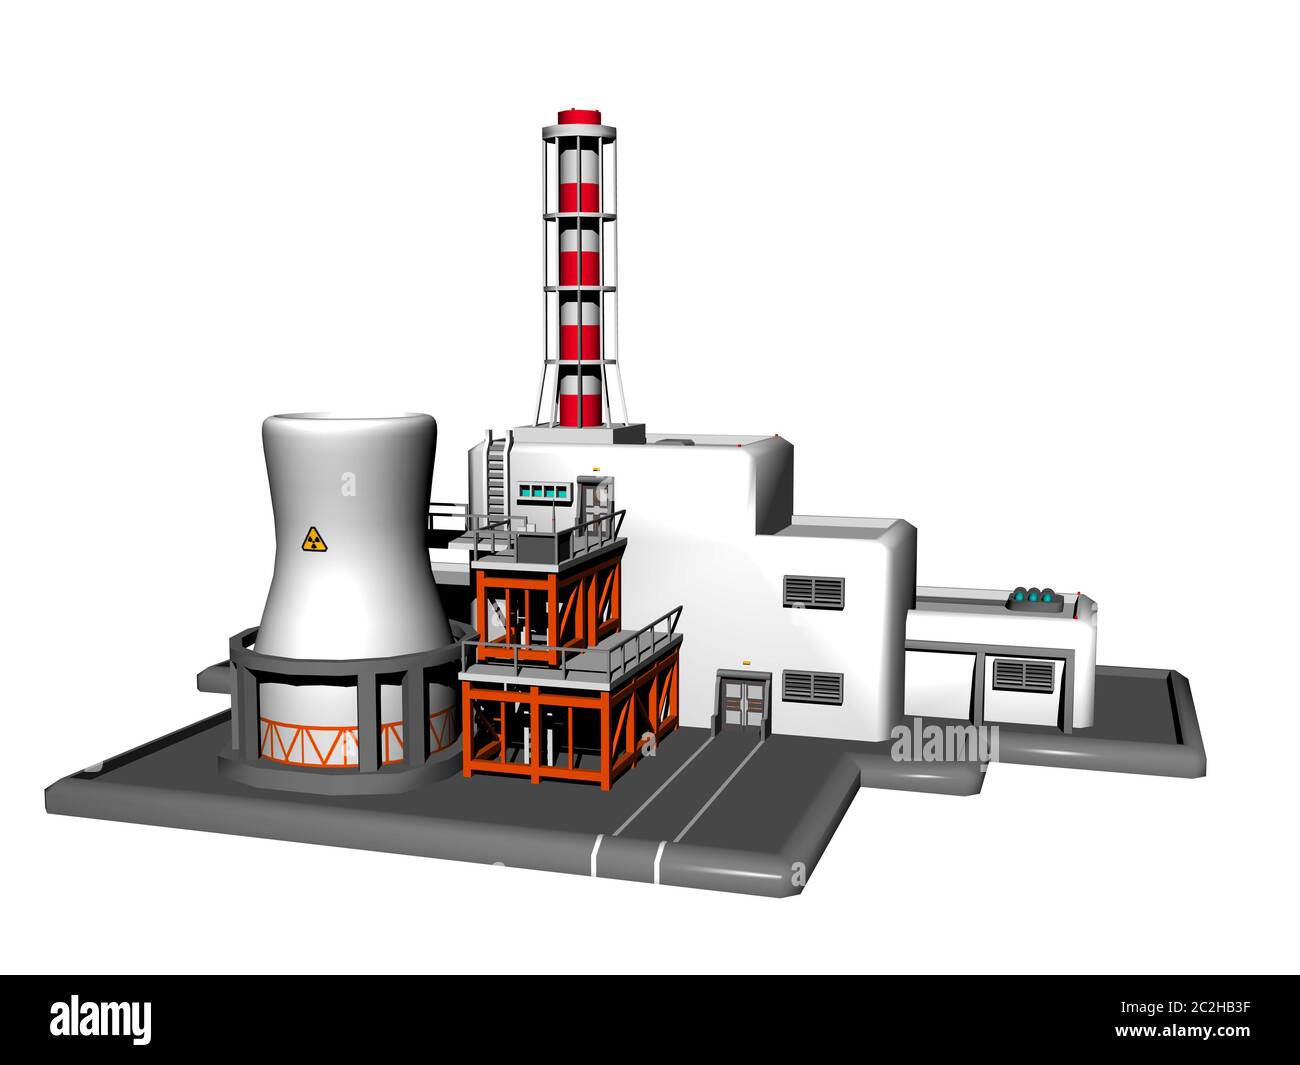 Nuclear power plant with cooling tower for energy supply Stock Photo